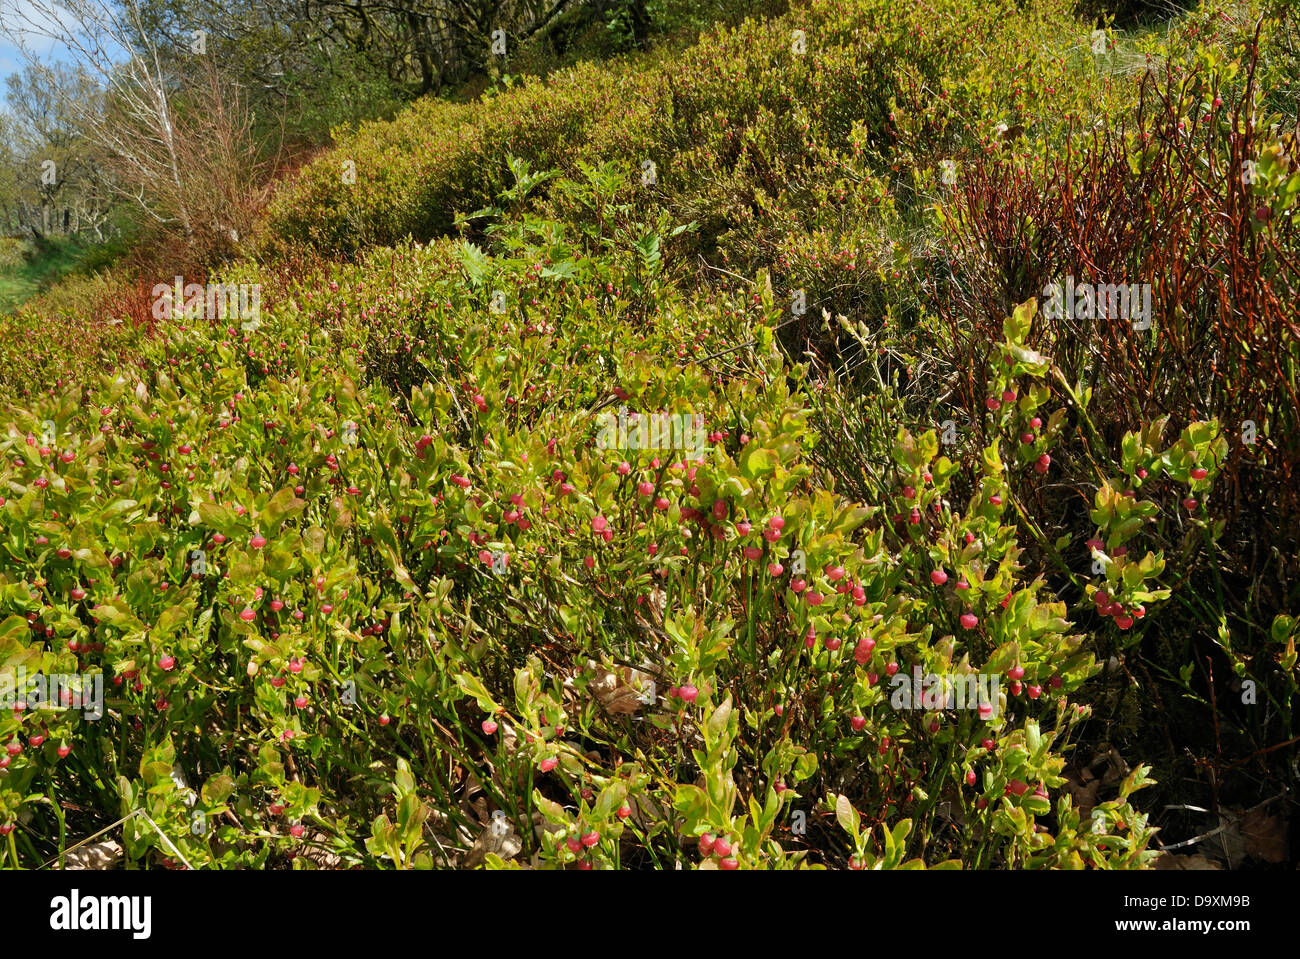 Bilberry - Vaccinium myrtillus Also known as Blaeberry or Whortleberry Large bank of flowering shrubs Stock Photo